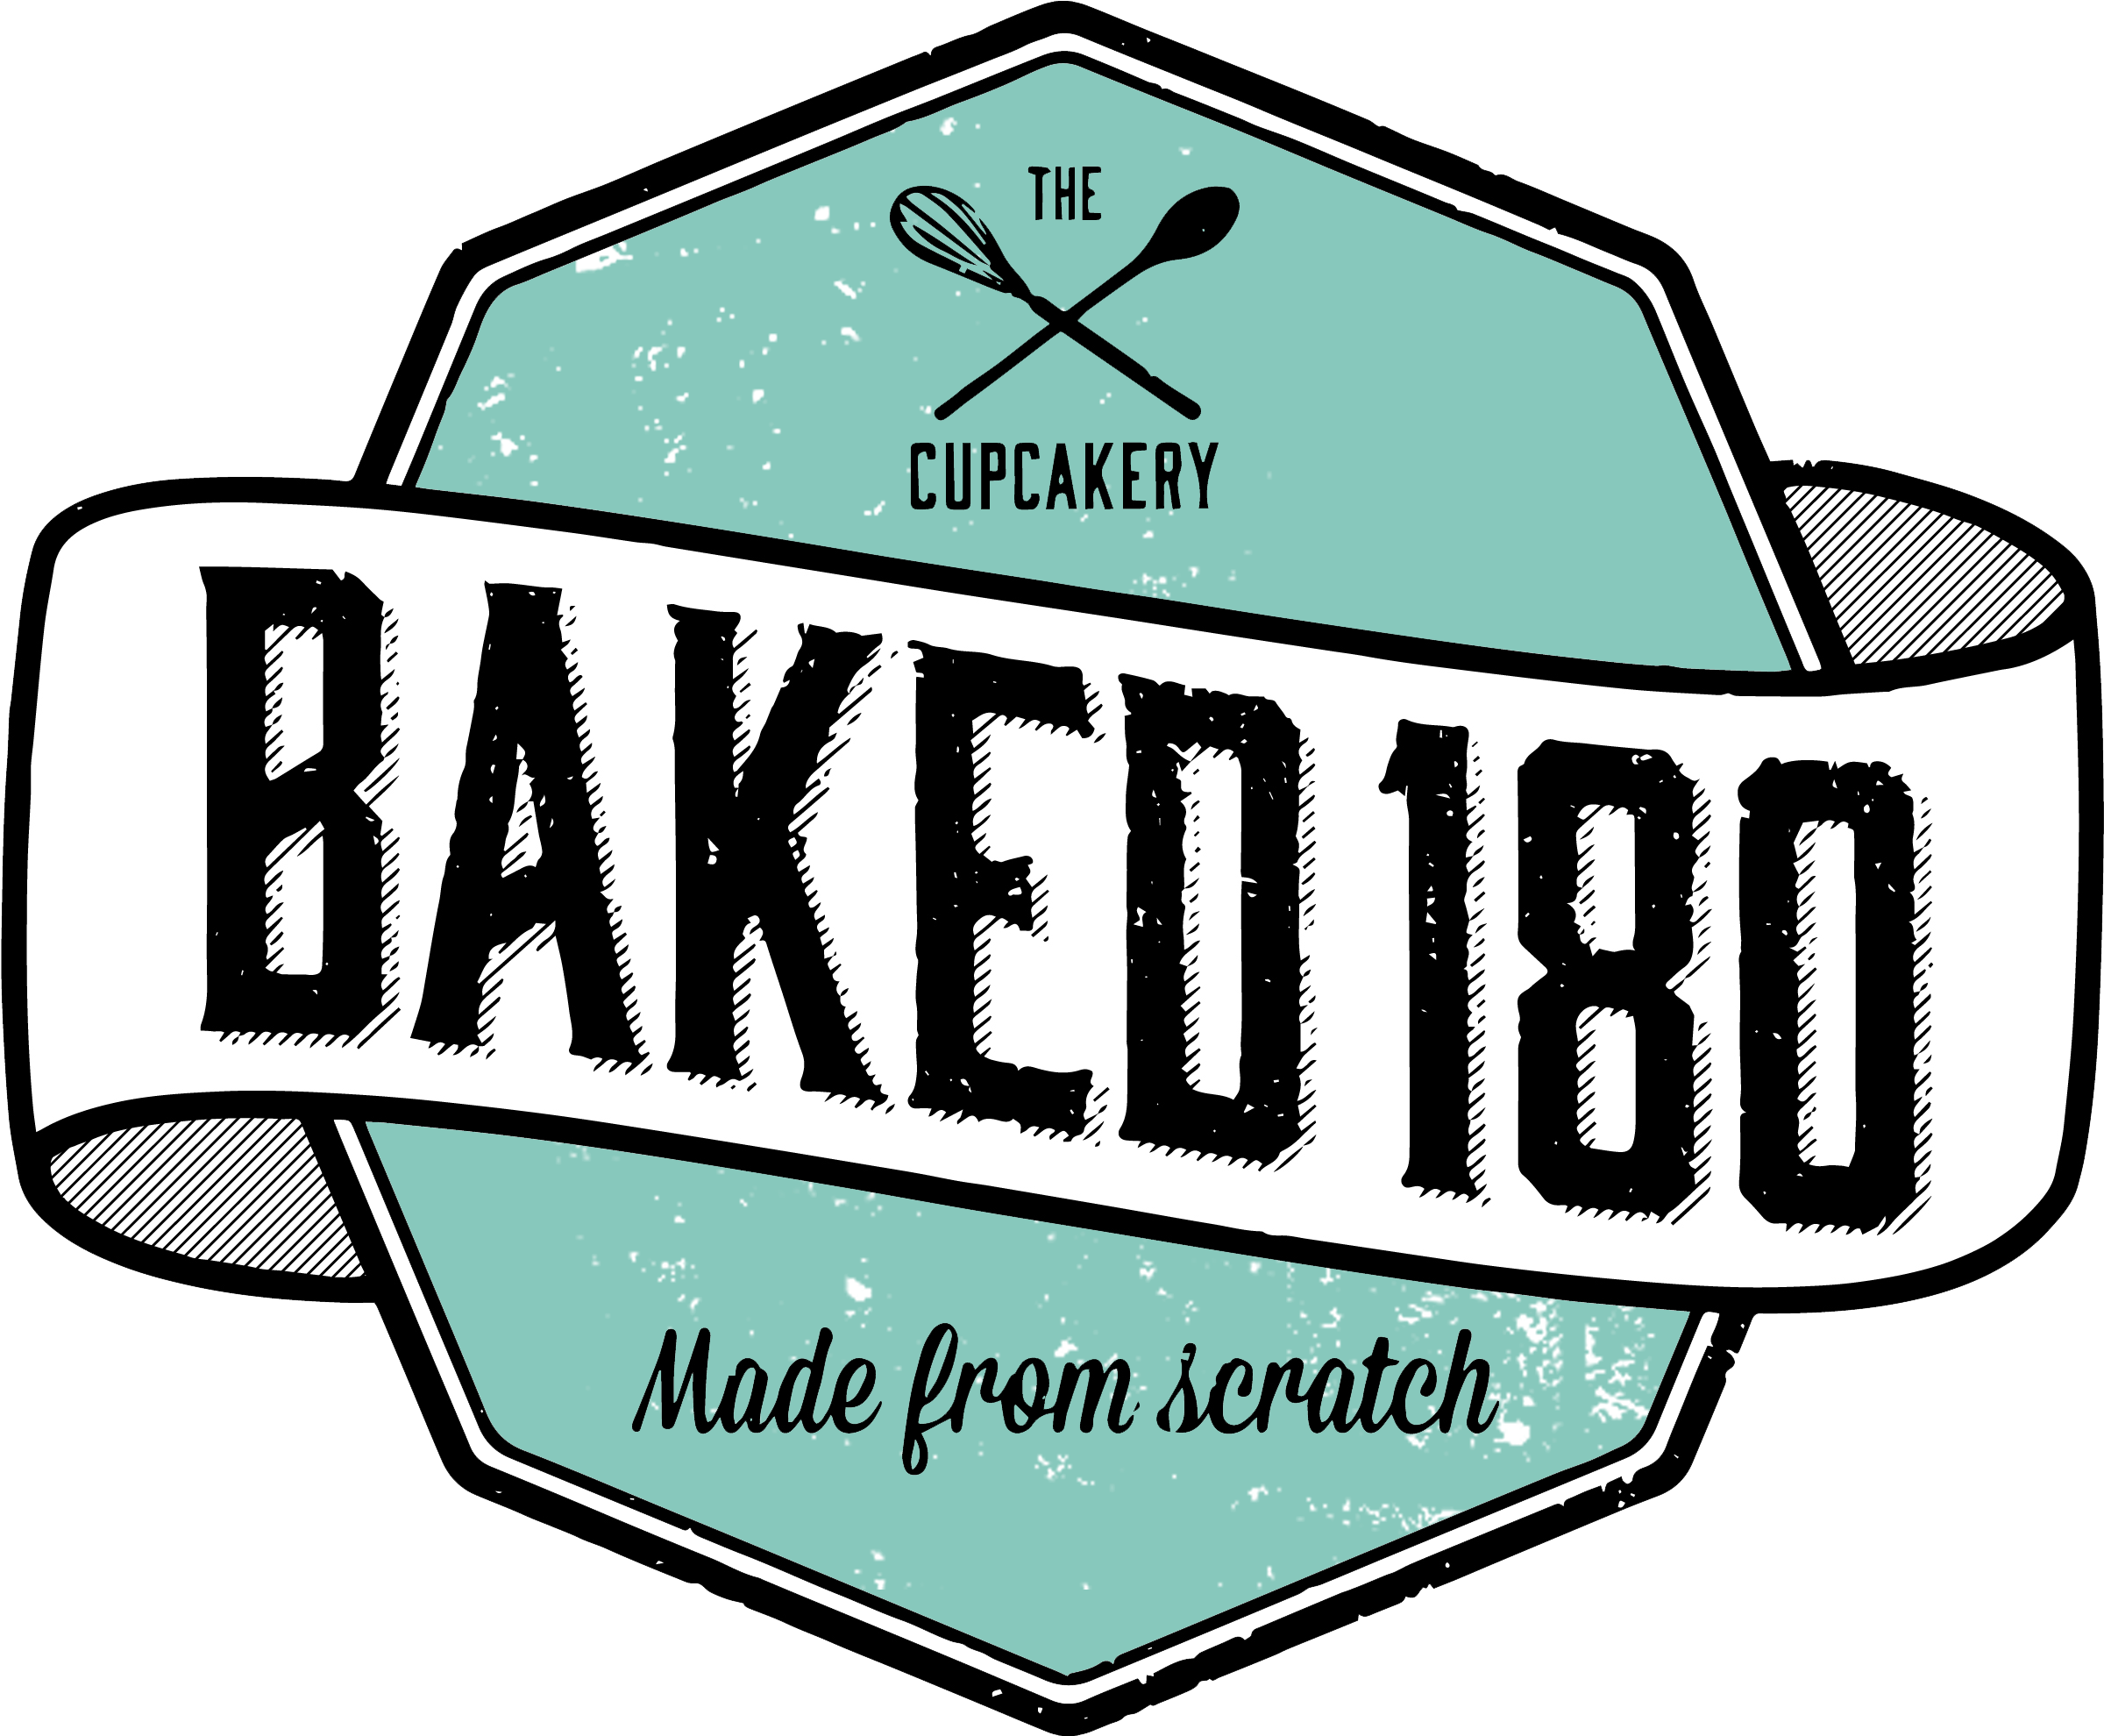 Baked 180 (2672x1979)